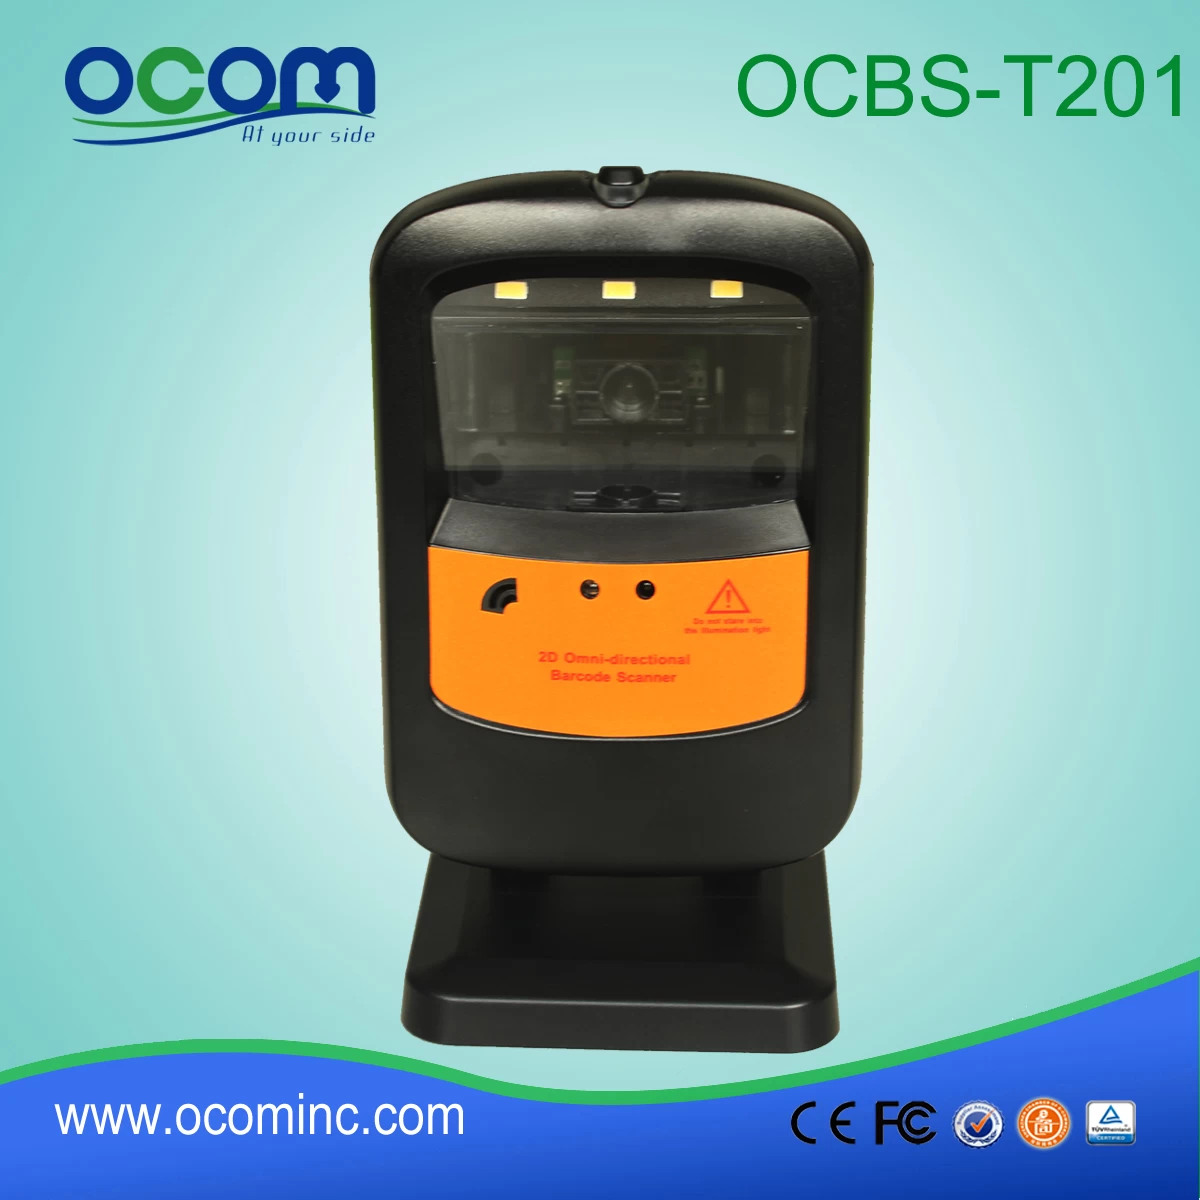 Omni-directional 2D hand-free barcode scanner OCBS-T201